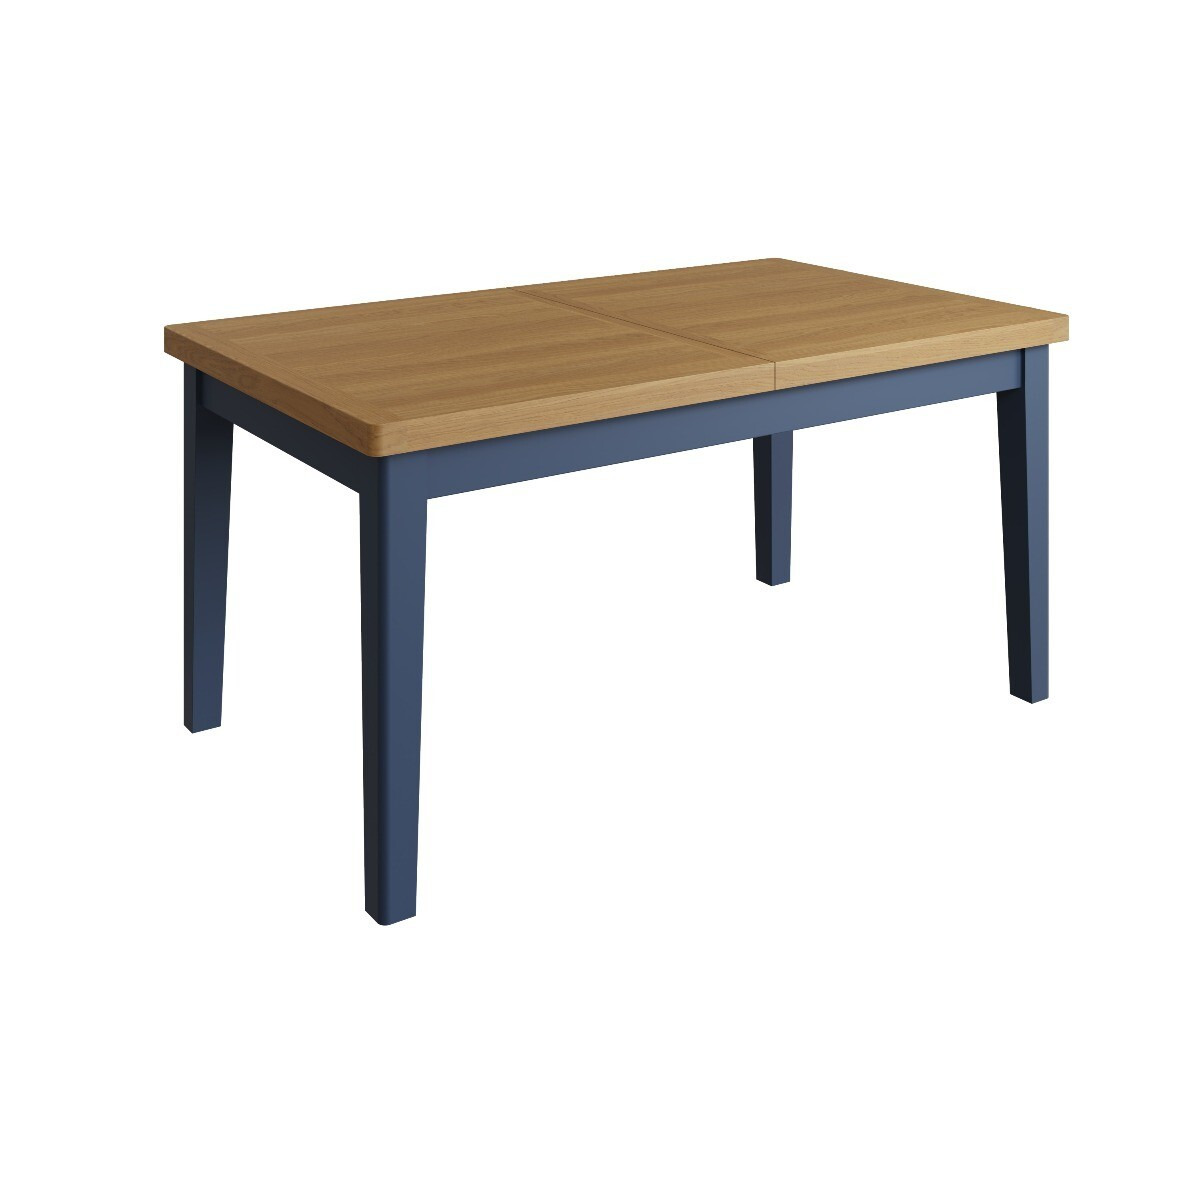 Cole 160cm Oak and Blue Painted Extending Dining Table